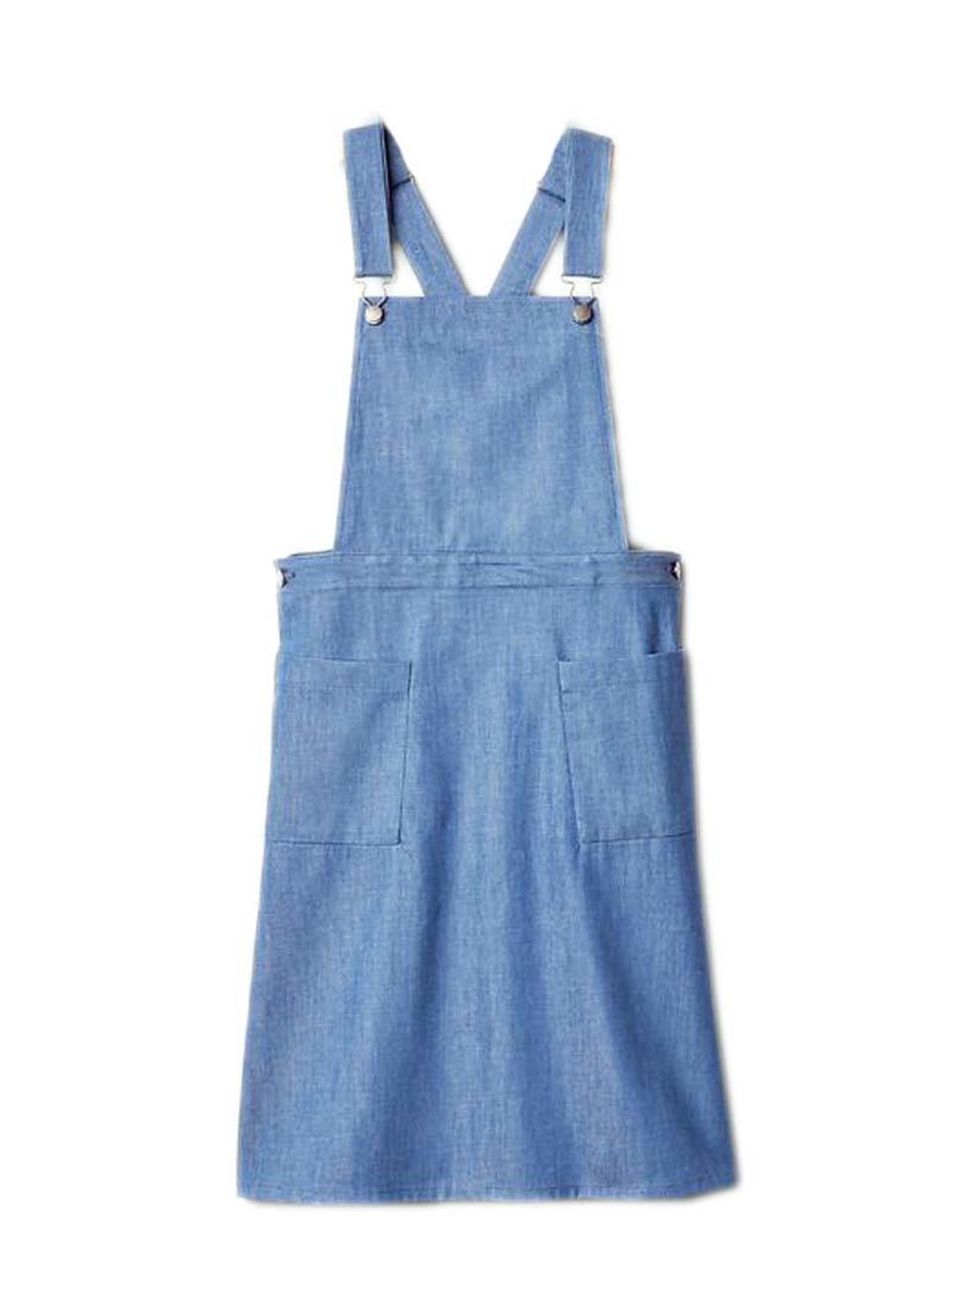 <p>Editorial Assistant Gillian Brett will layer this denim dress over a fine-knit rollneck.</p>

<p><a href="http://www.gap.co.uk/browse/product.do?cid=1028671&vid=1&pid=000227292000" target="_blank">Gap</a> dress, £49.95</p>